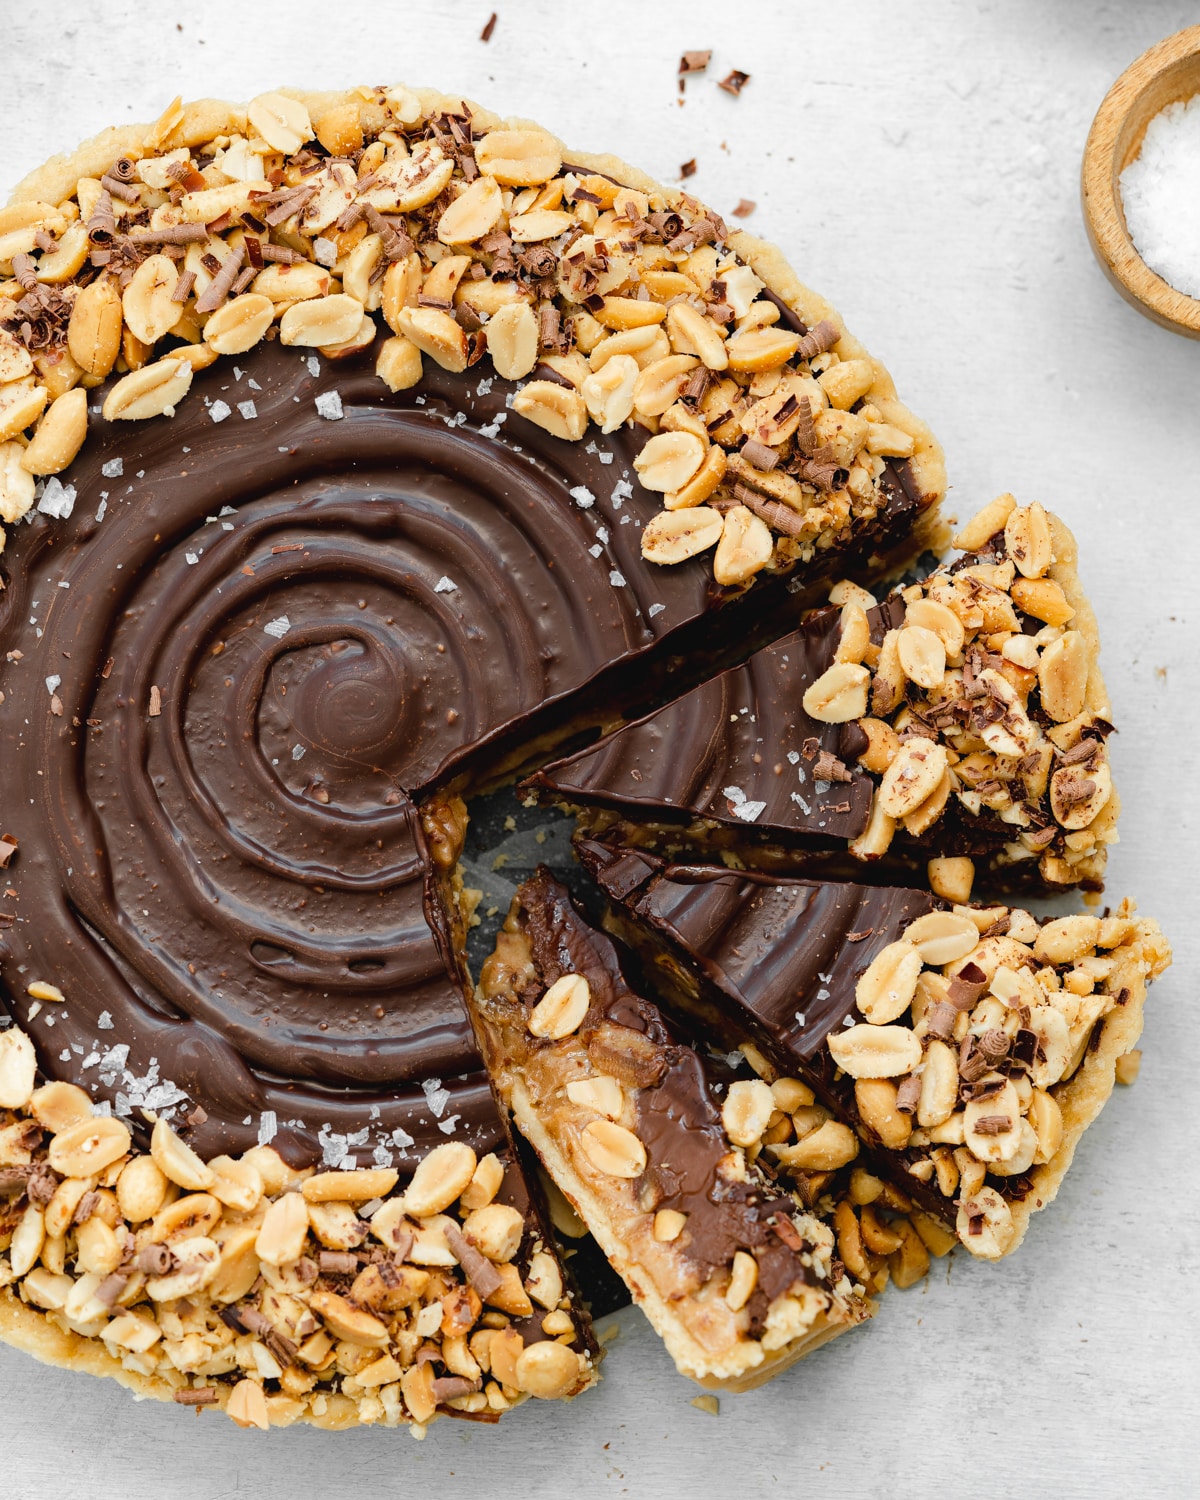 chocolate tart with peanut butter center and roasted peanuts on top.